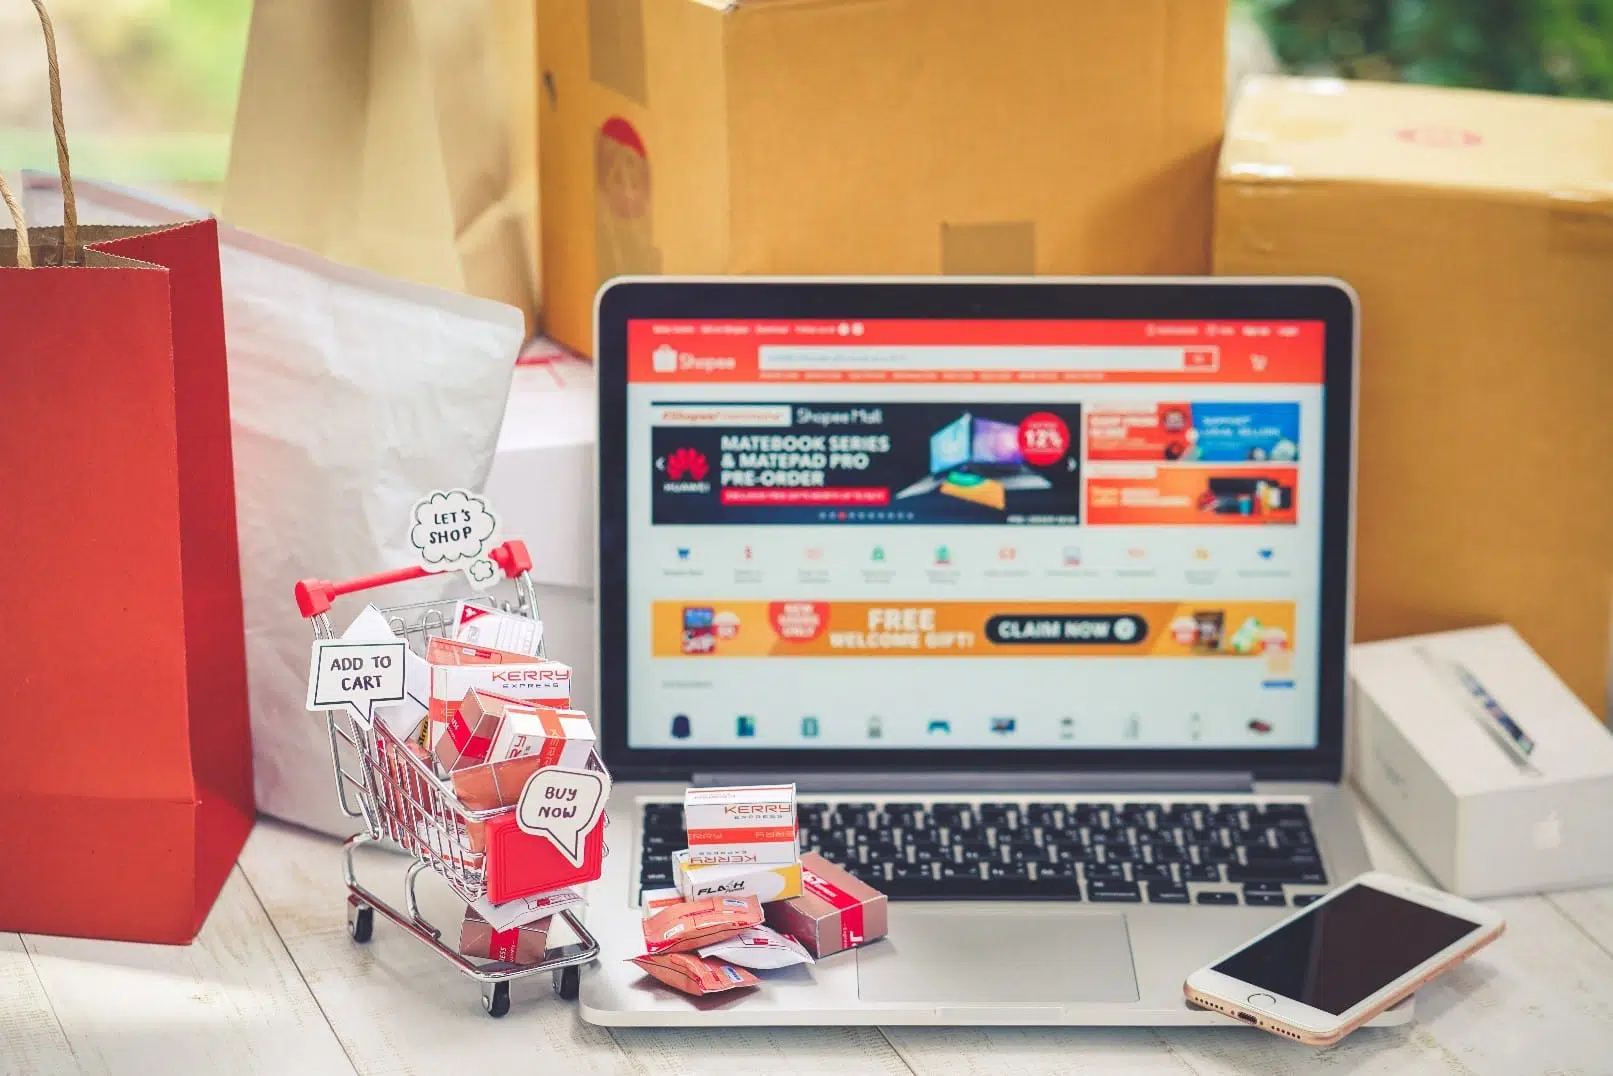 A computer is showing the Shopee Malaysia eCommerce market website while a shopping cart next to it says, "Let's Shop," "Add to Cart," and "Buy Now;" there is a shopping bag in the picture, a newly-purchased iPhone, and the shopping cart is filled with eCommerce packages.